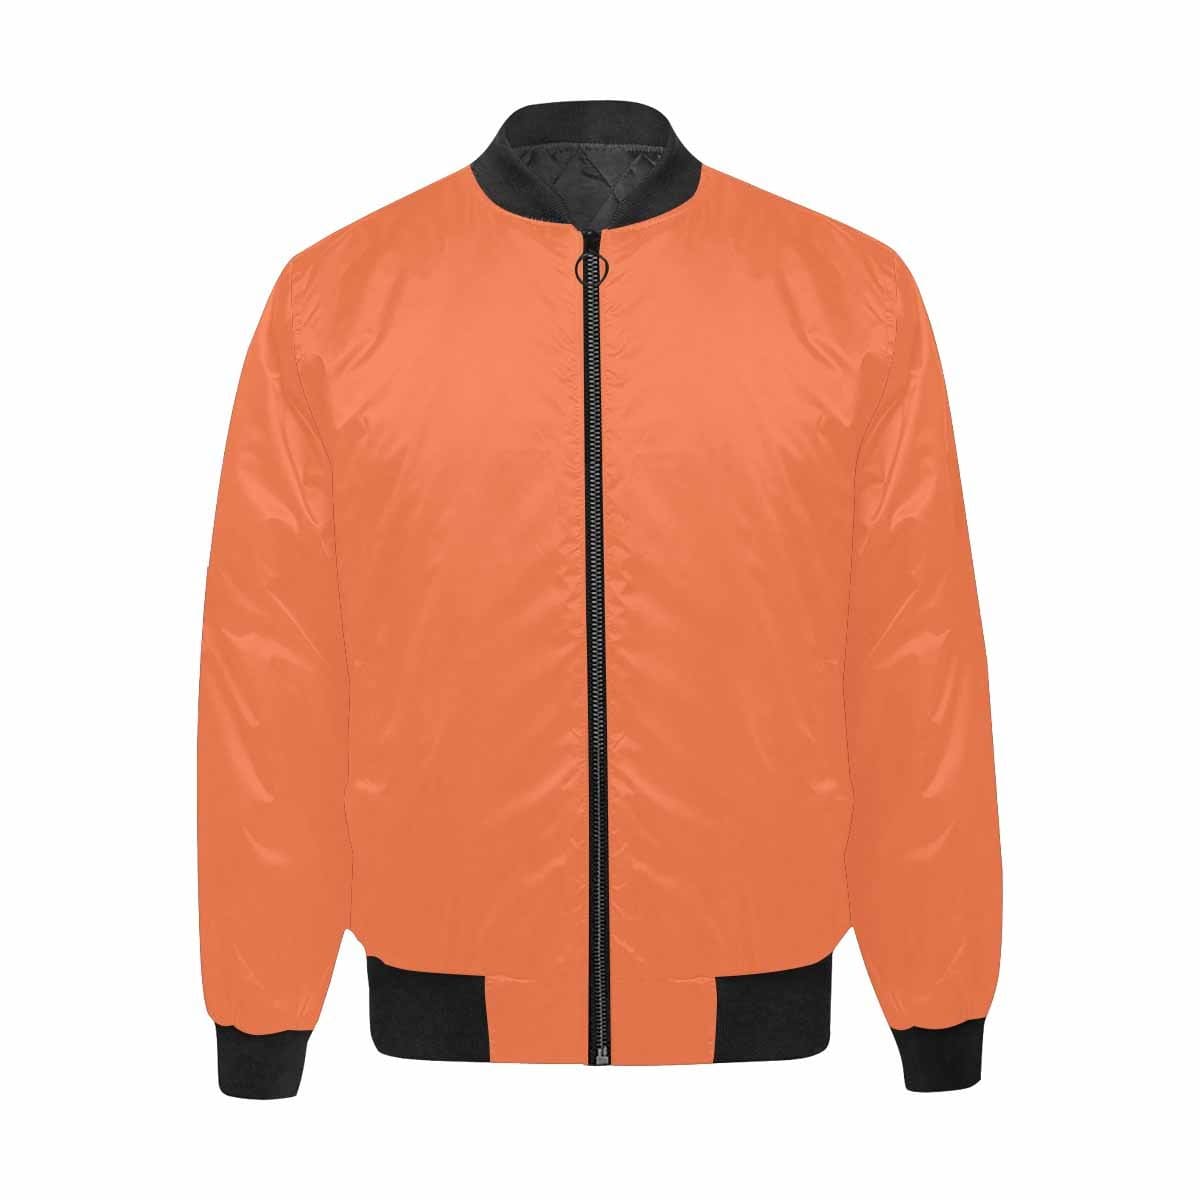 Mens Jacket Coral Red And Black Bomber Jacket - Mens | Jackets | Bombers